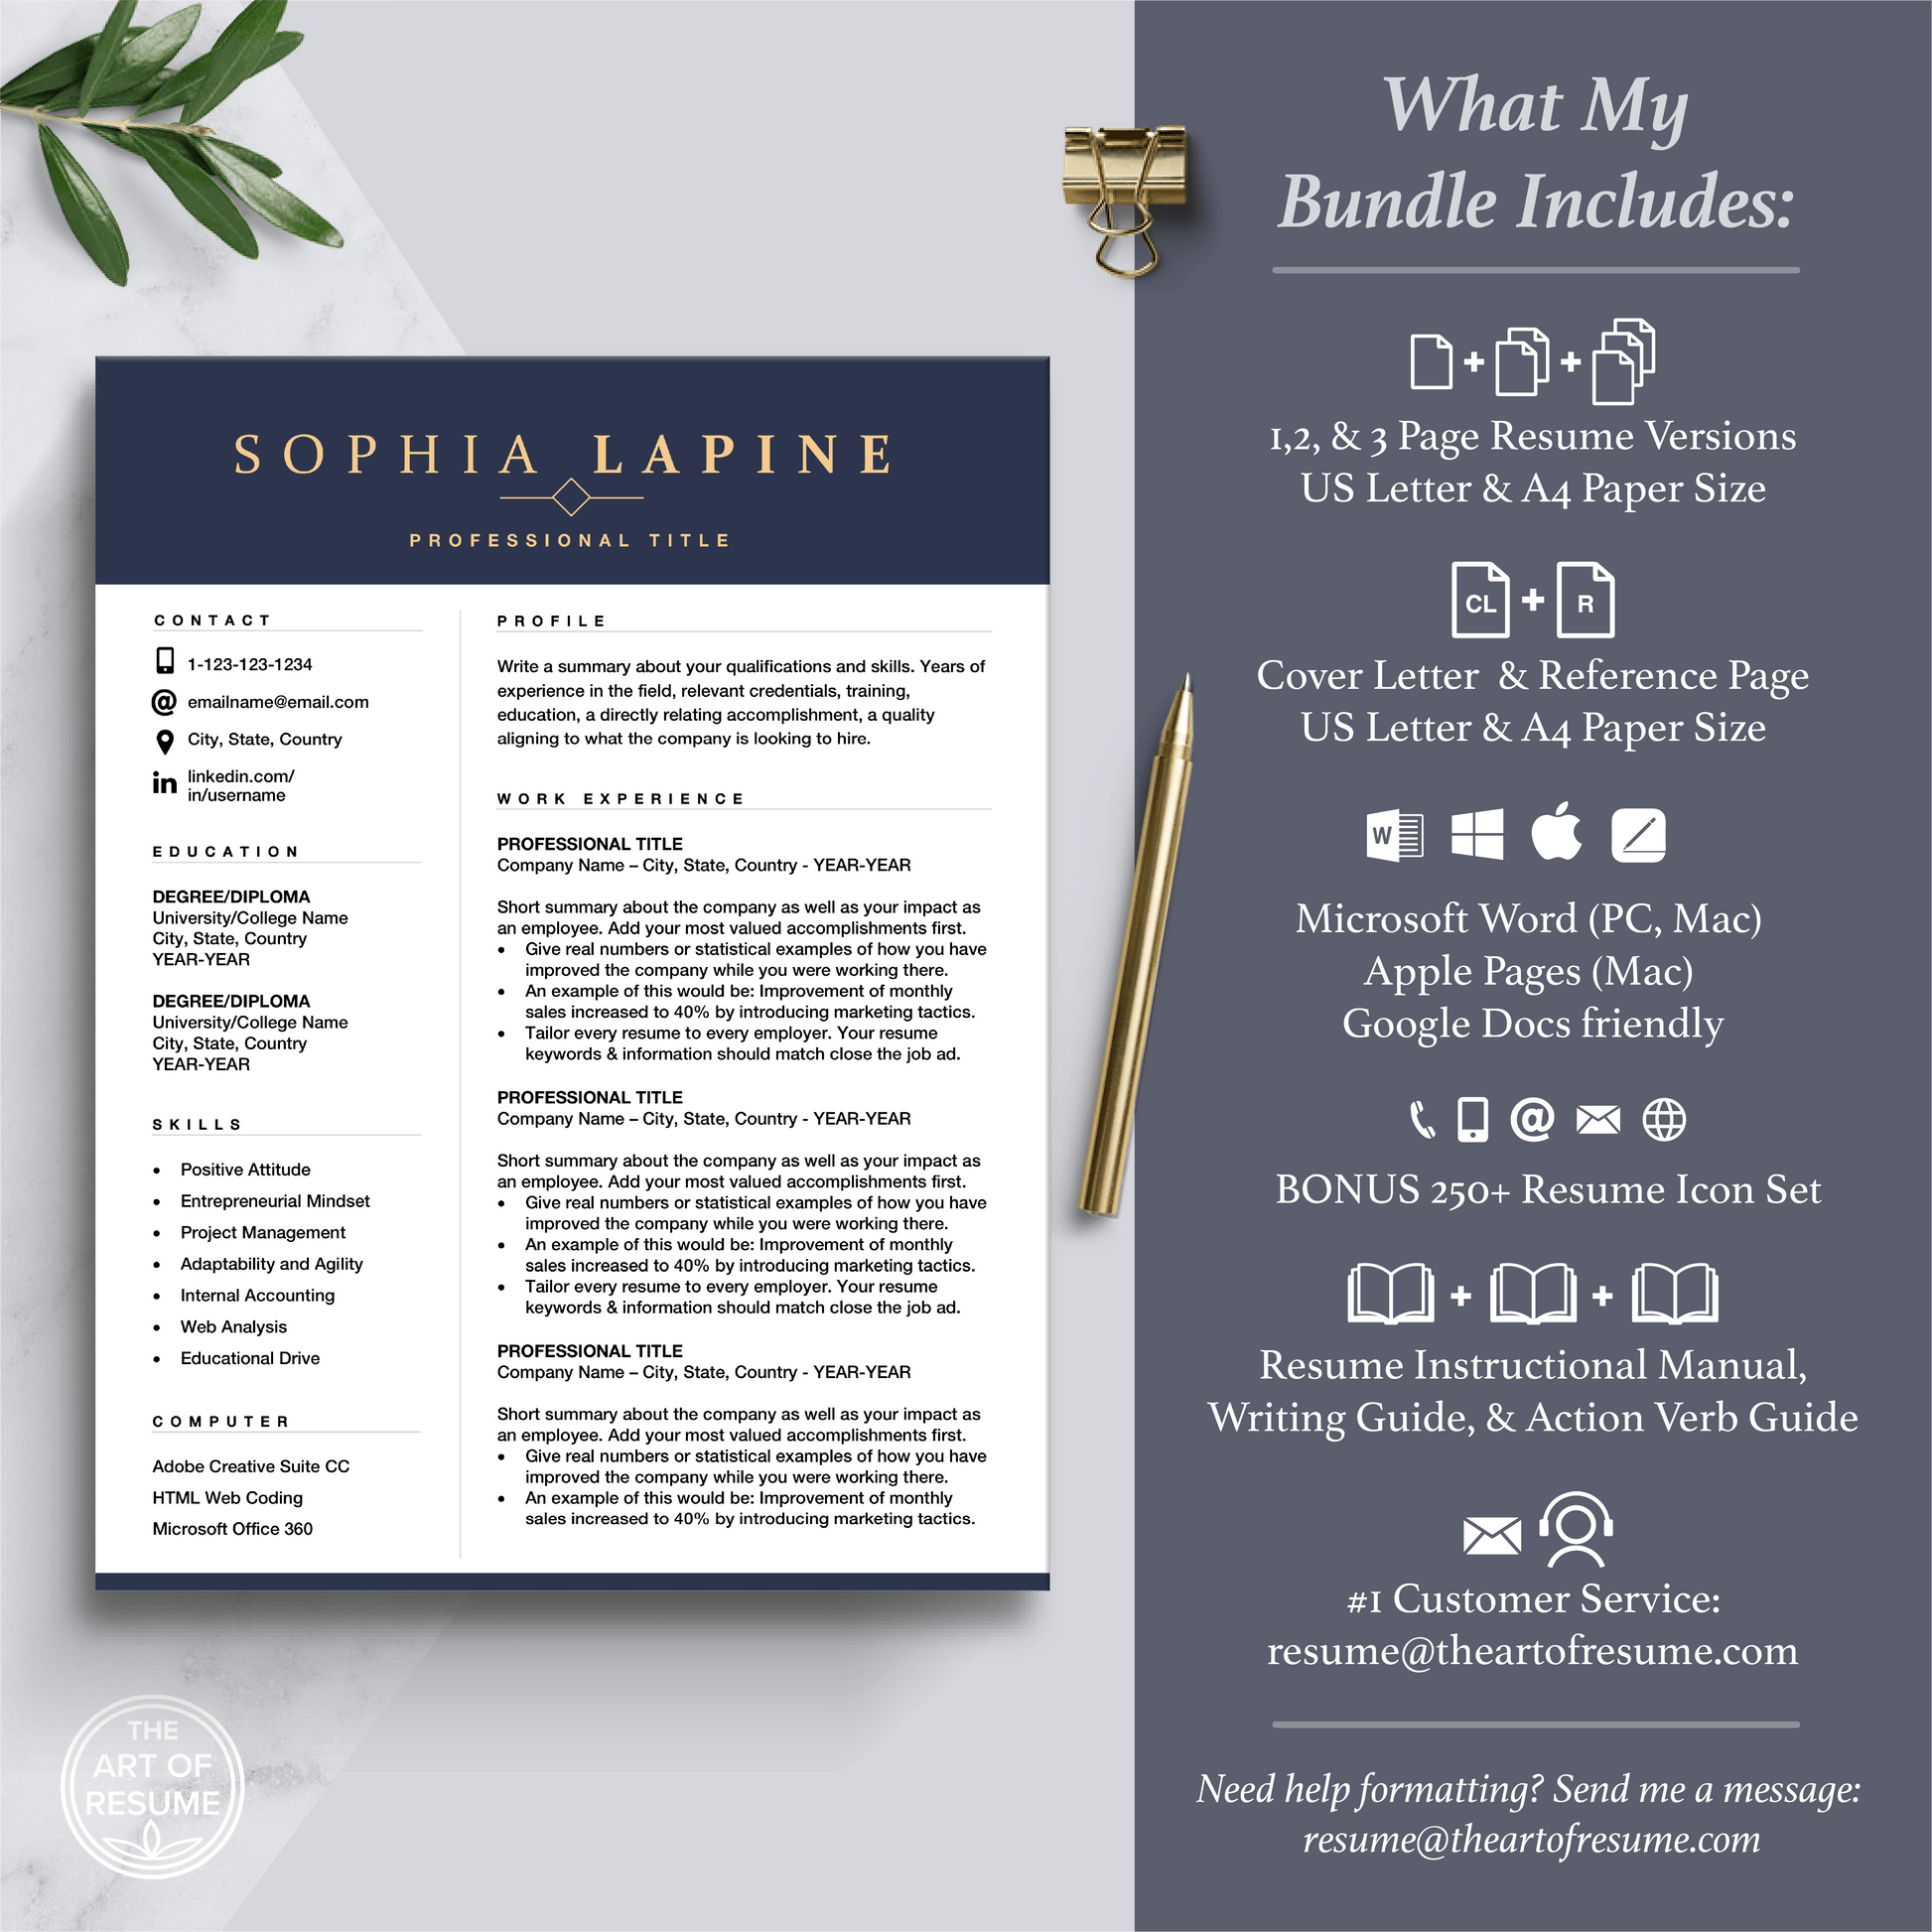 The Art of Resume Templates | Professional Navy Blue Resume CV Template Includes 3 Editable Resume Templates, Cover Letter, Reference Page, Mac, PC, A4 Paper, US size, Free Guide, The Art of Resume Writing, 250 Bonus Resume Icons